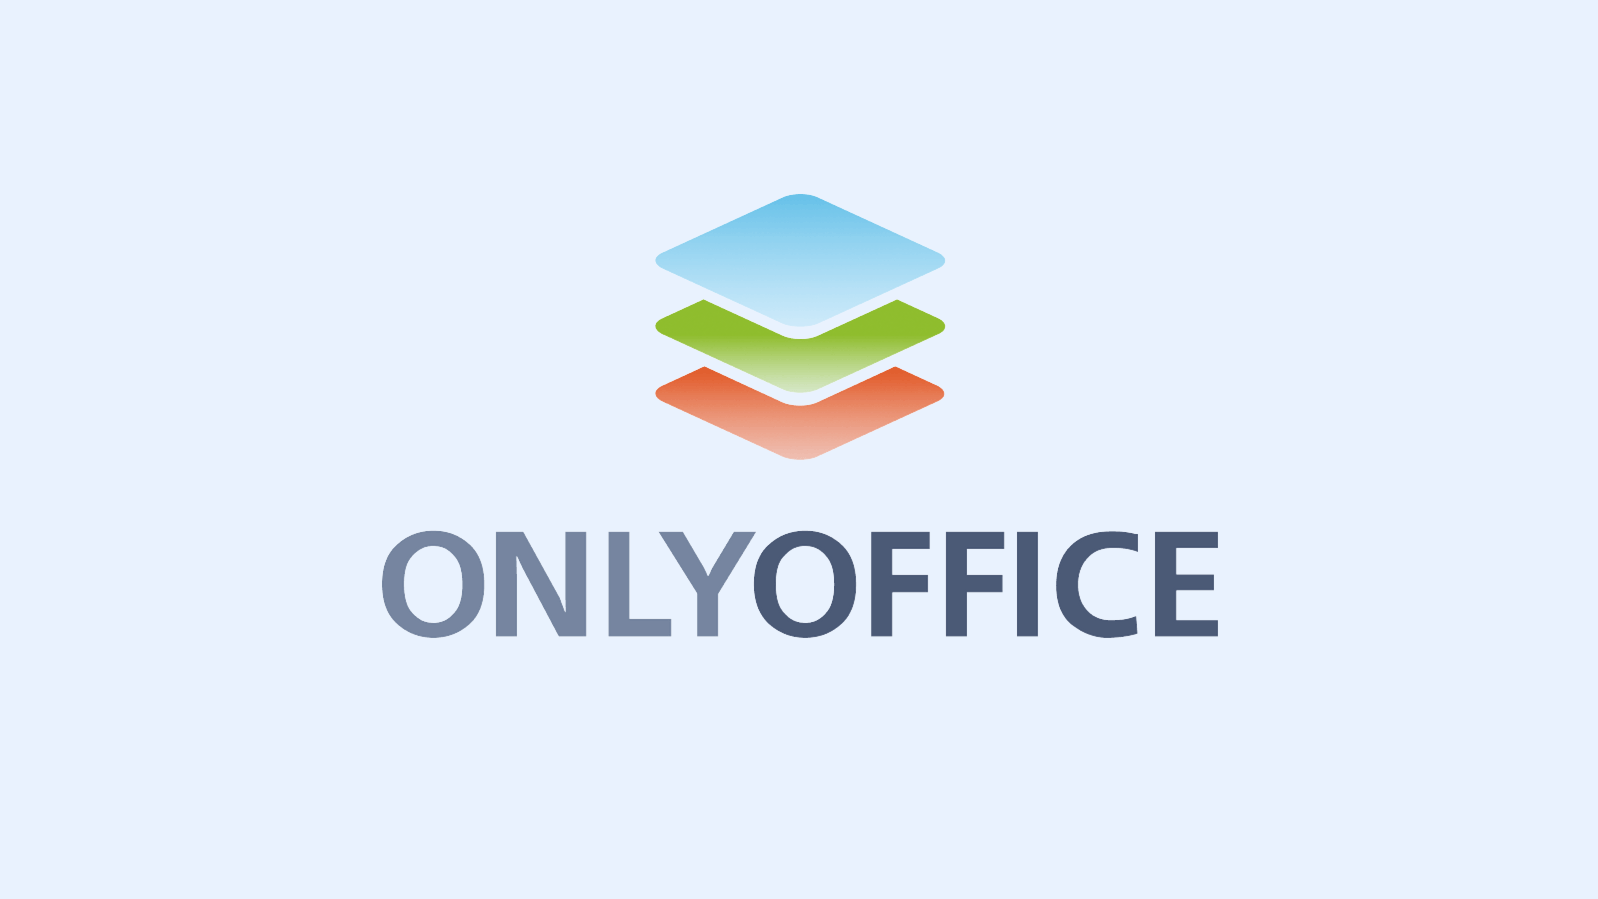 ONLYOFFICE 7.4.1.36 for windows instal free